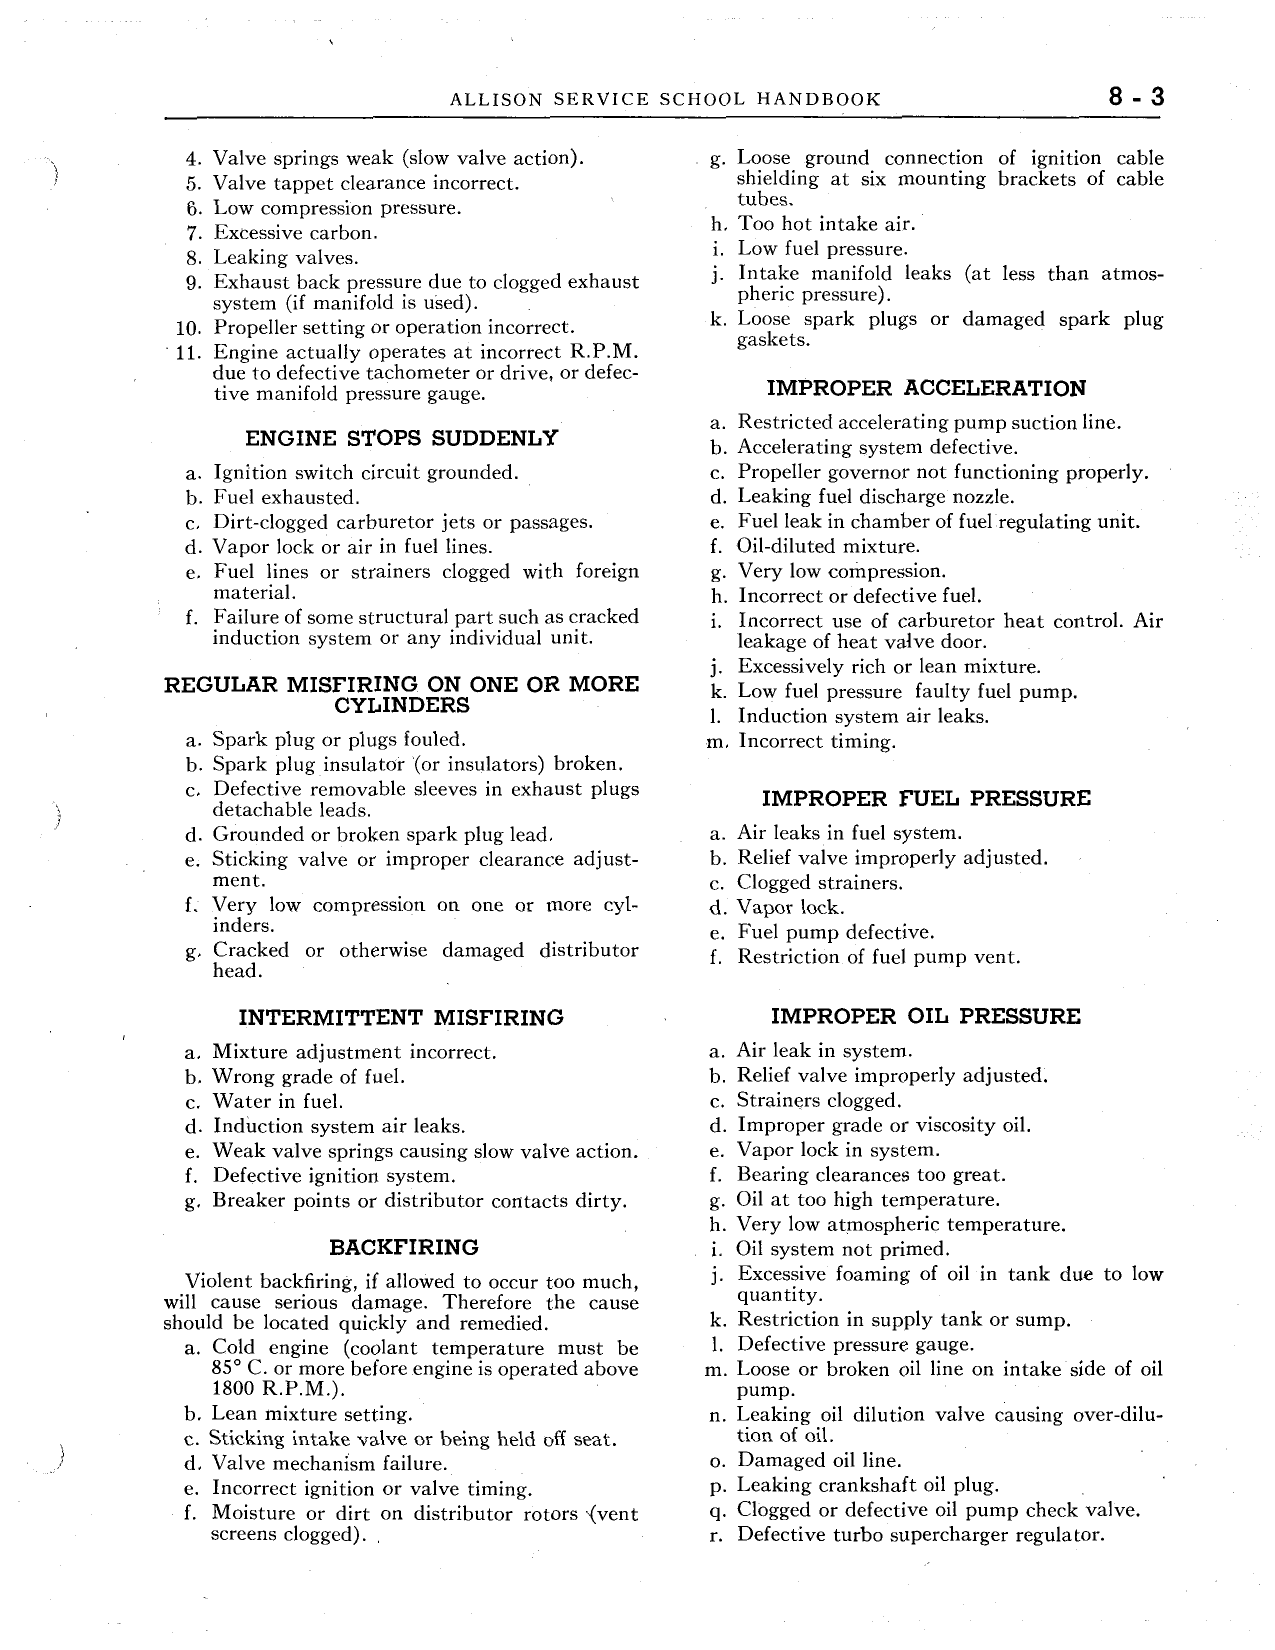 Sample page 133 from AirCorps Library document: Service School Handbook - Allison V-1710-E, V-1710-F